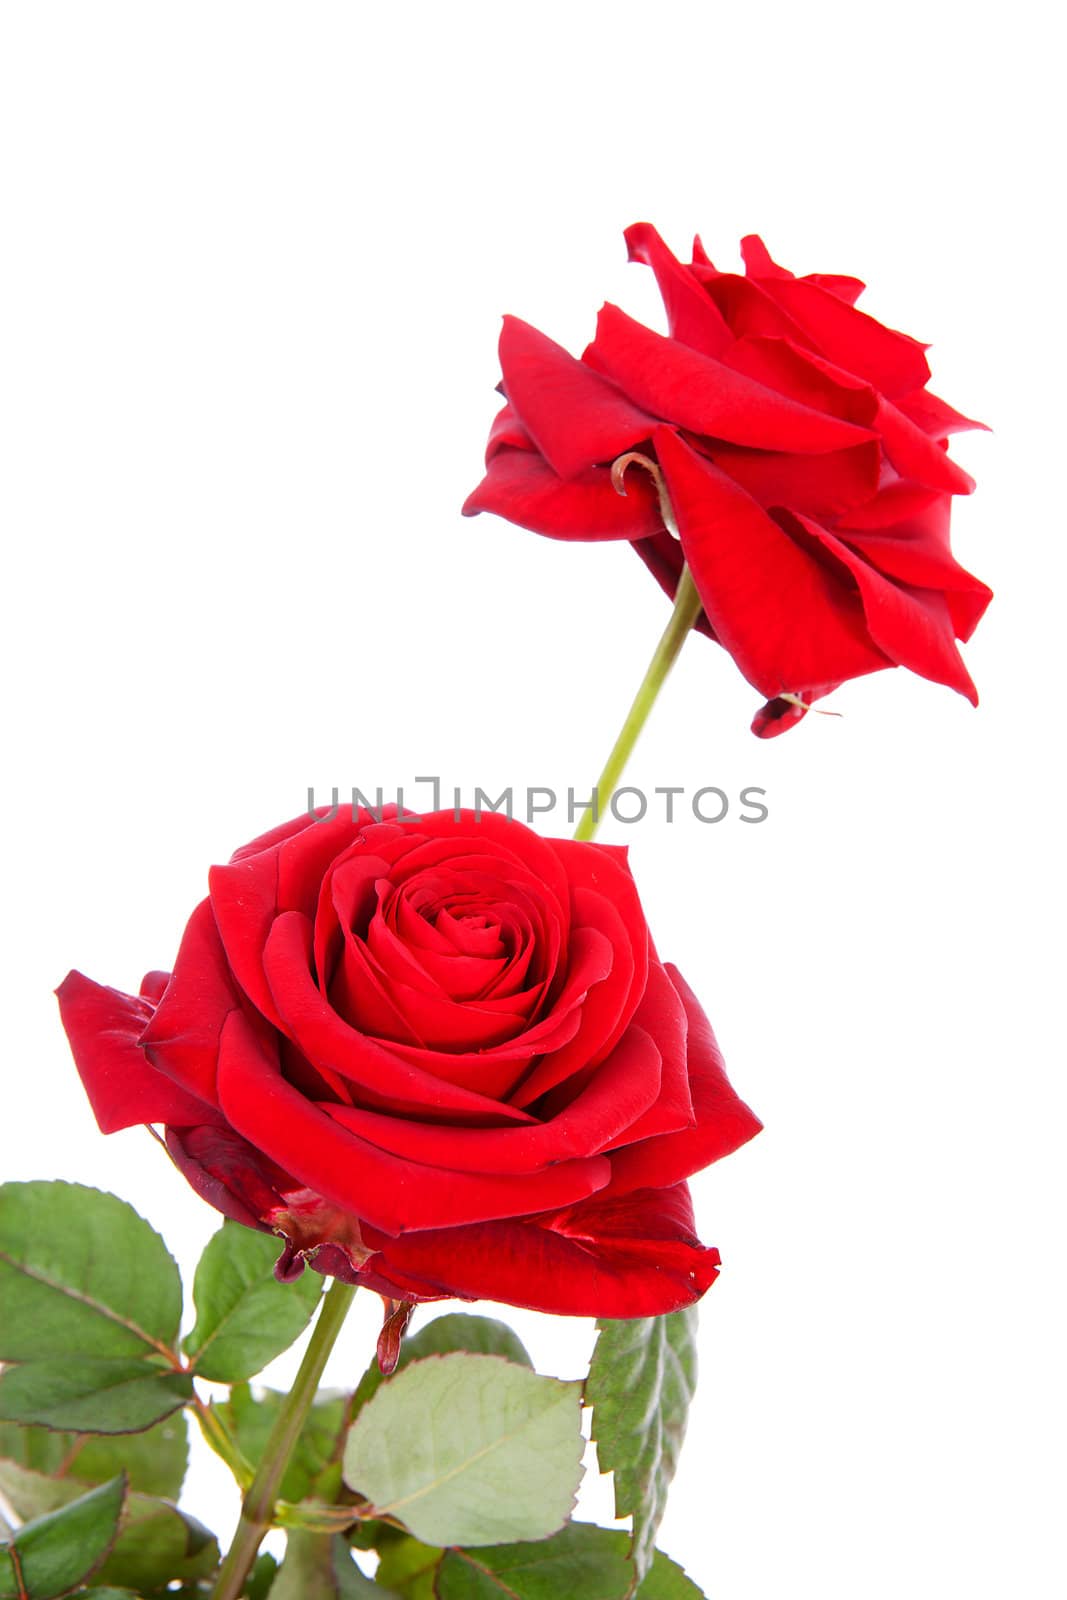 Two red roses in closeup over white background